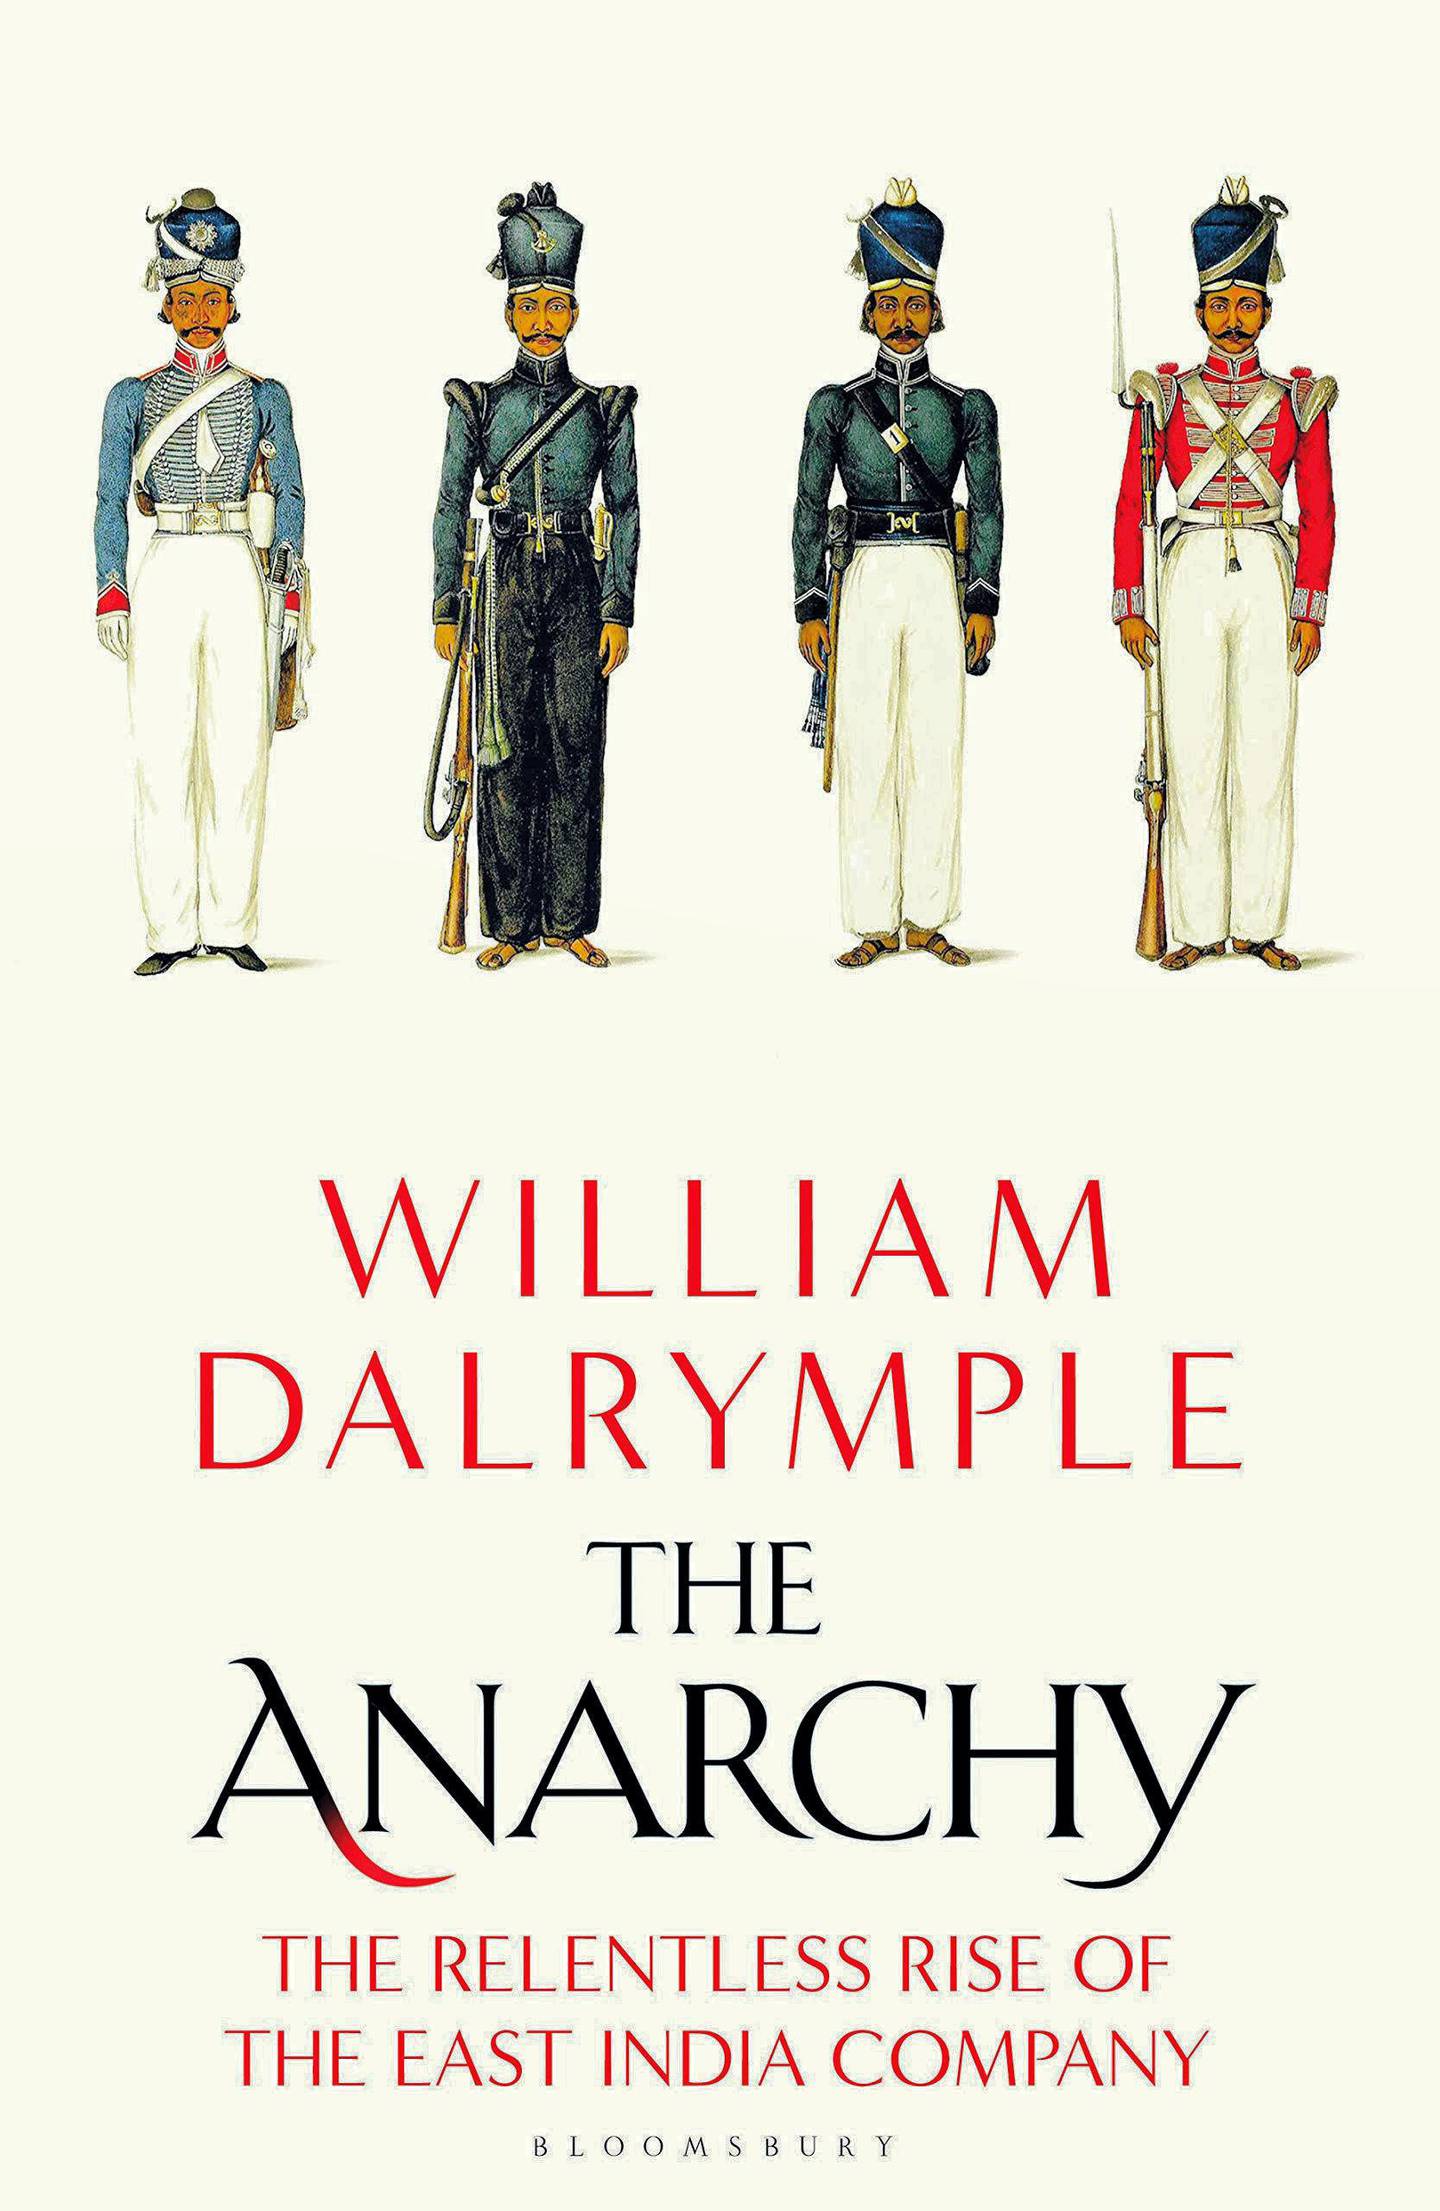 'The Anarchy' by William Dalrymple